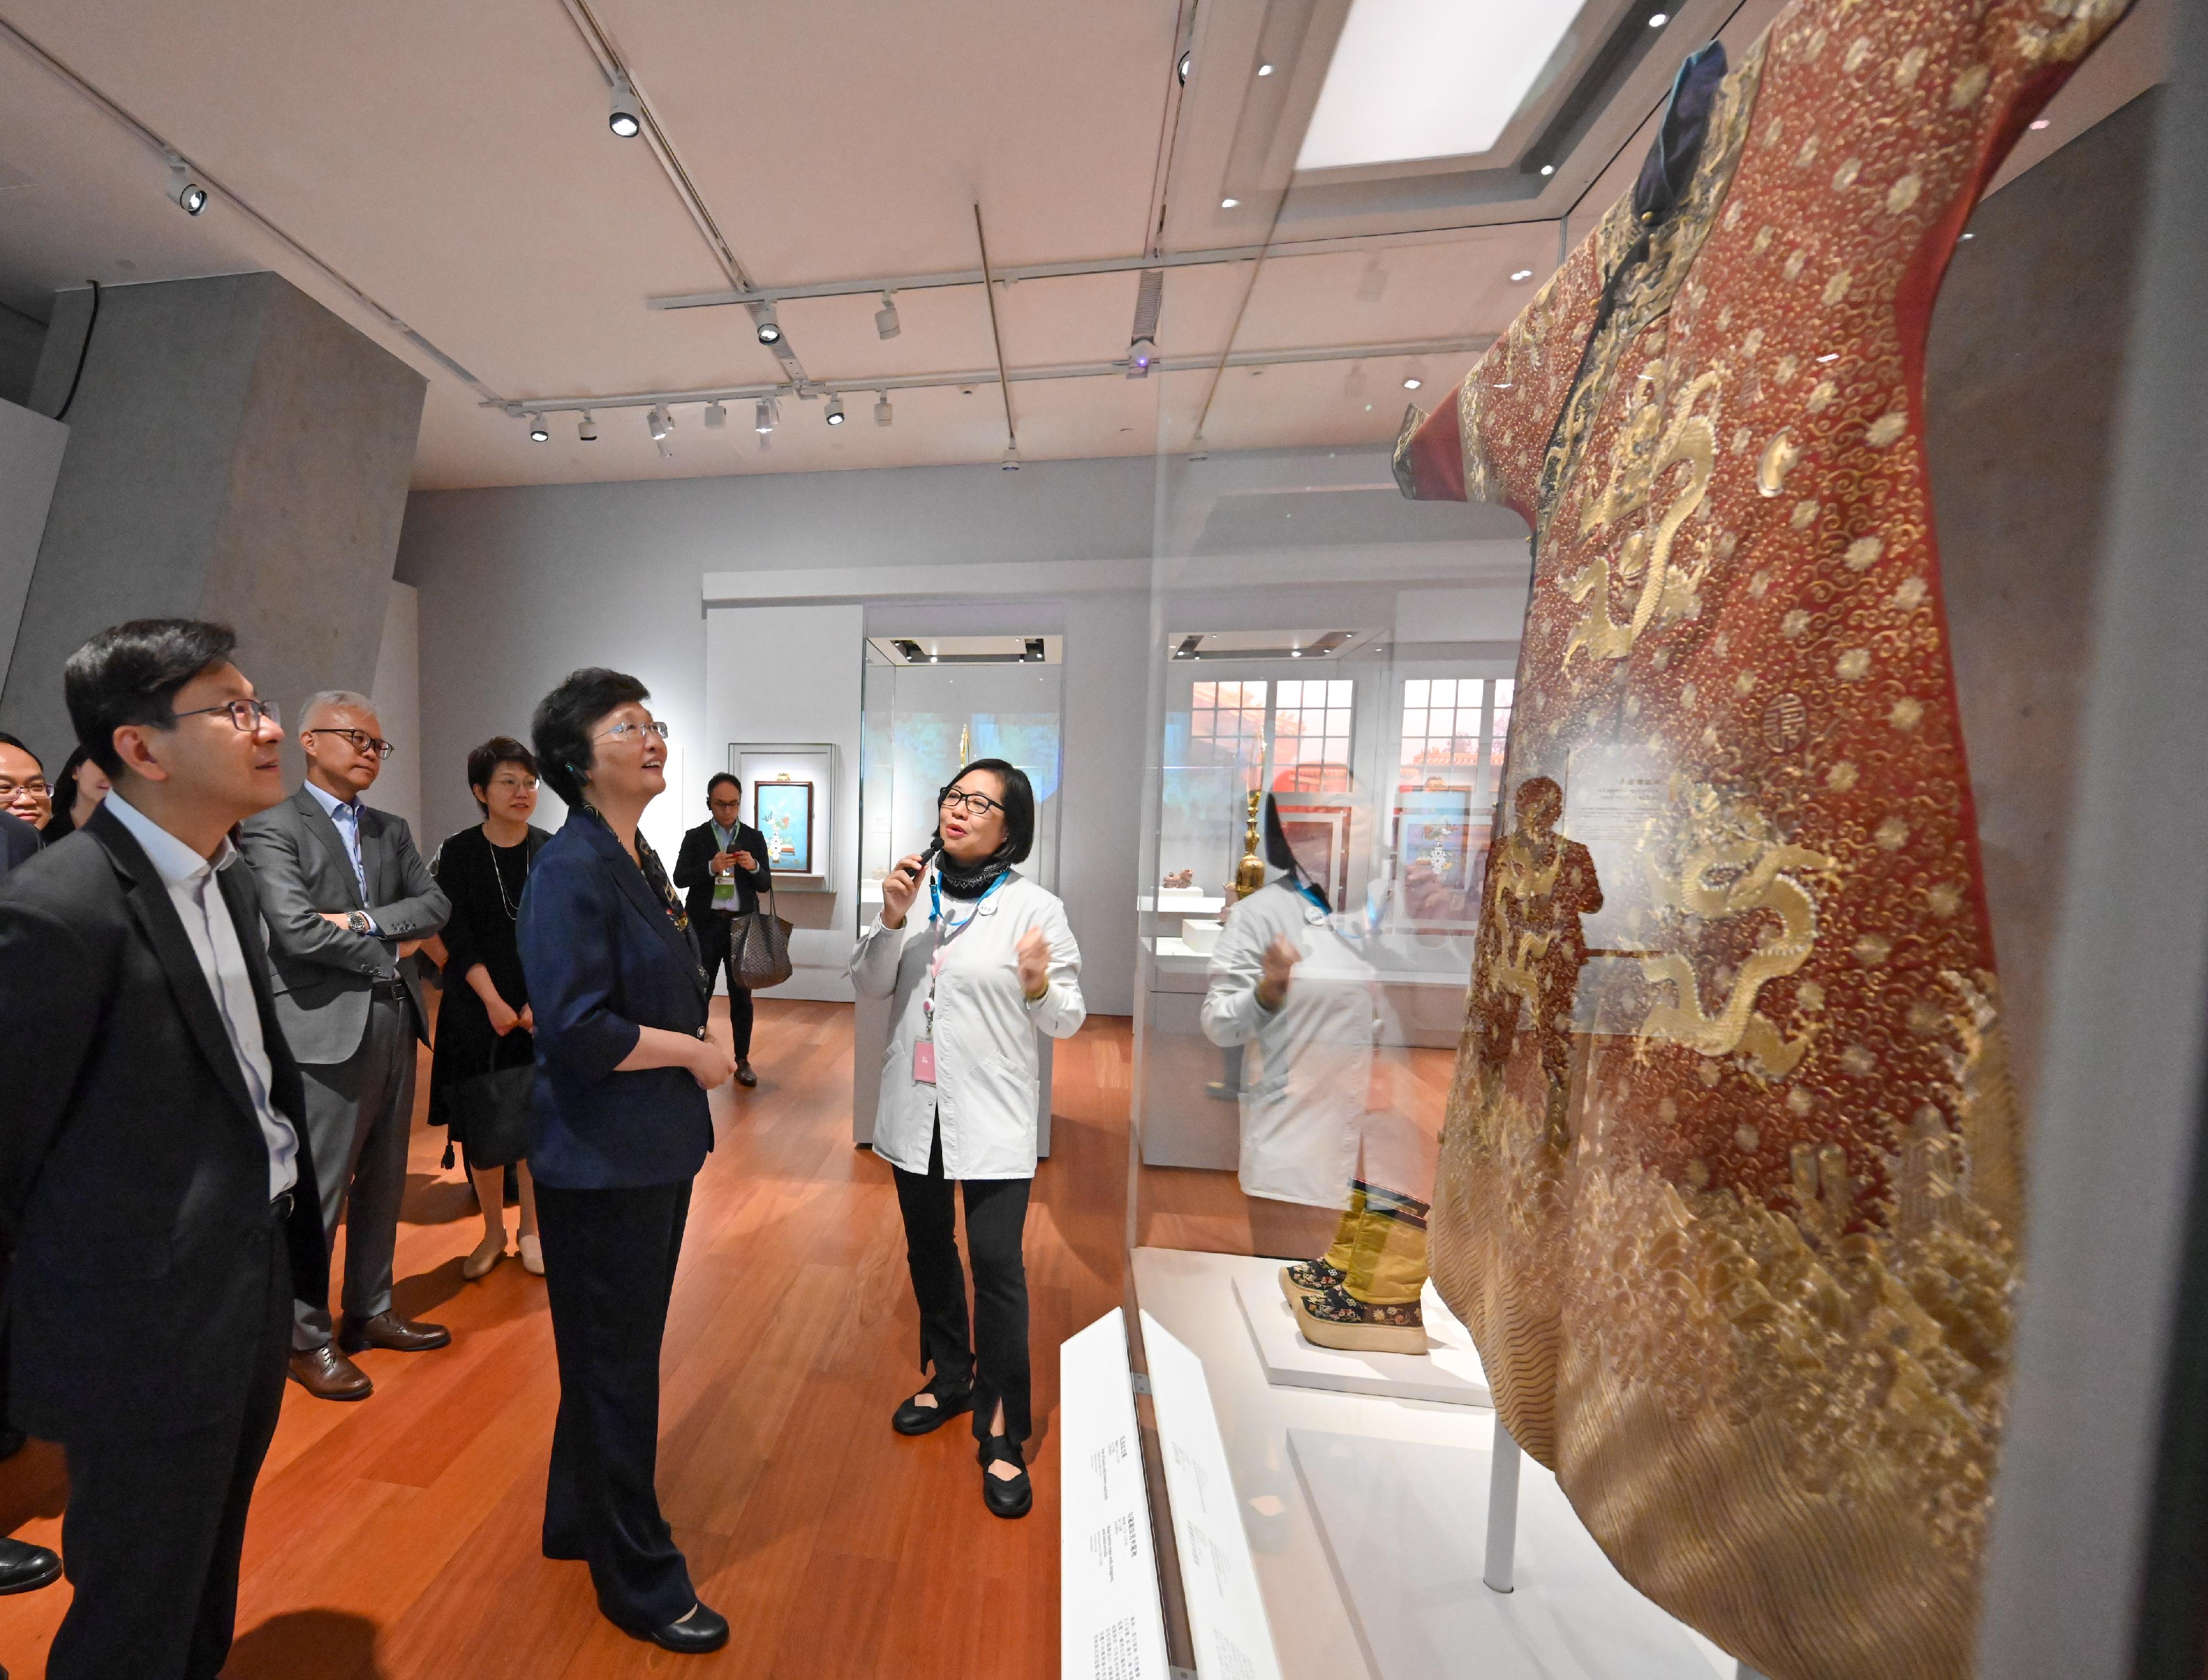 The Minister of Human Resources and Social Security, Ms Wang Xiaoping, visited the "YUAN MING YUAN - Art and Culture of an Imperial Garden-Palace" exhibition at the Hong Kong Palace Museum yesterday (May 6). The Chief Secretary for Administration, Mr Chan Kwok-ki, hosted a welcome dinner for Ms Wang as well as officials, guests and speakers visiting Hong Kong for the Global Talent Summit · Hong Kong. Photo shows Ms Wang (front row, centre), accompanied by the Secretary for Labour and Welfare, Mr Chris Sun (front row, left), touring the exhibition.